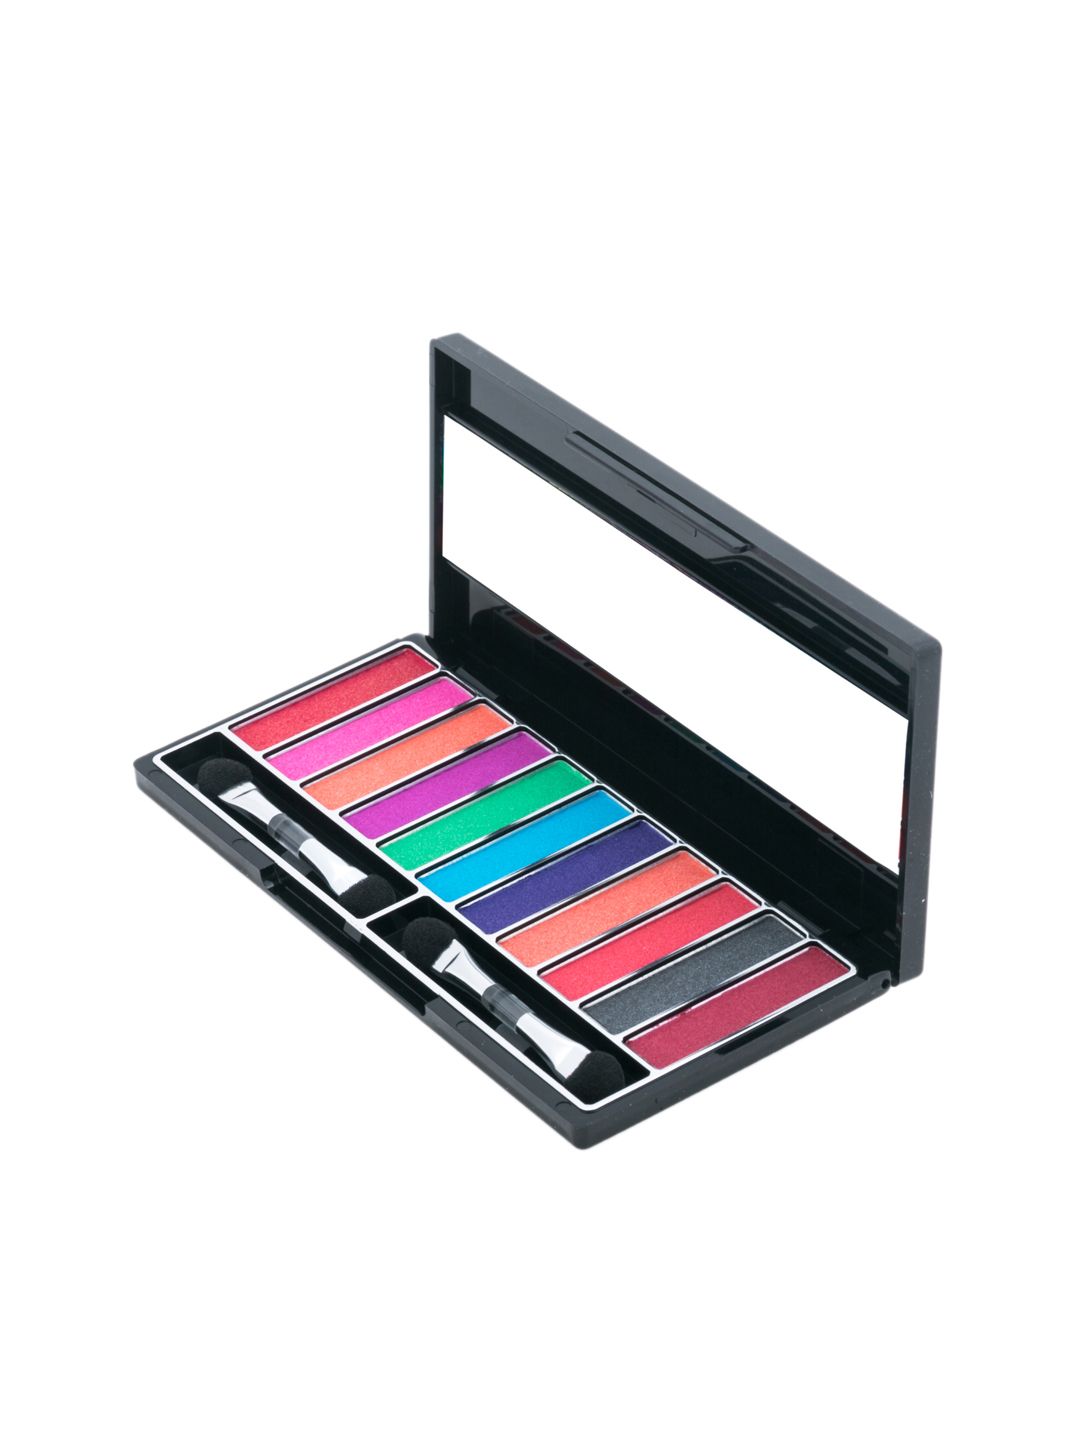 Miss Claire Eyeshadow Kit 3716-11-3 Price in India